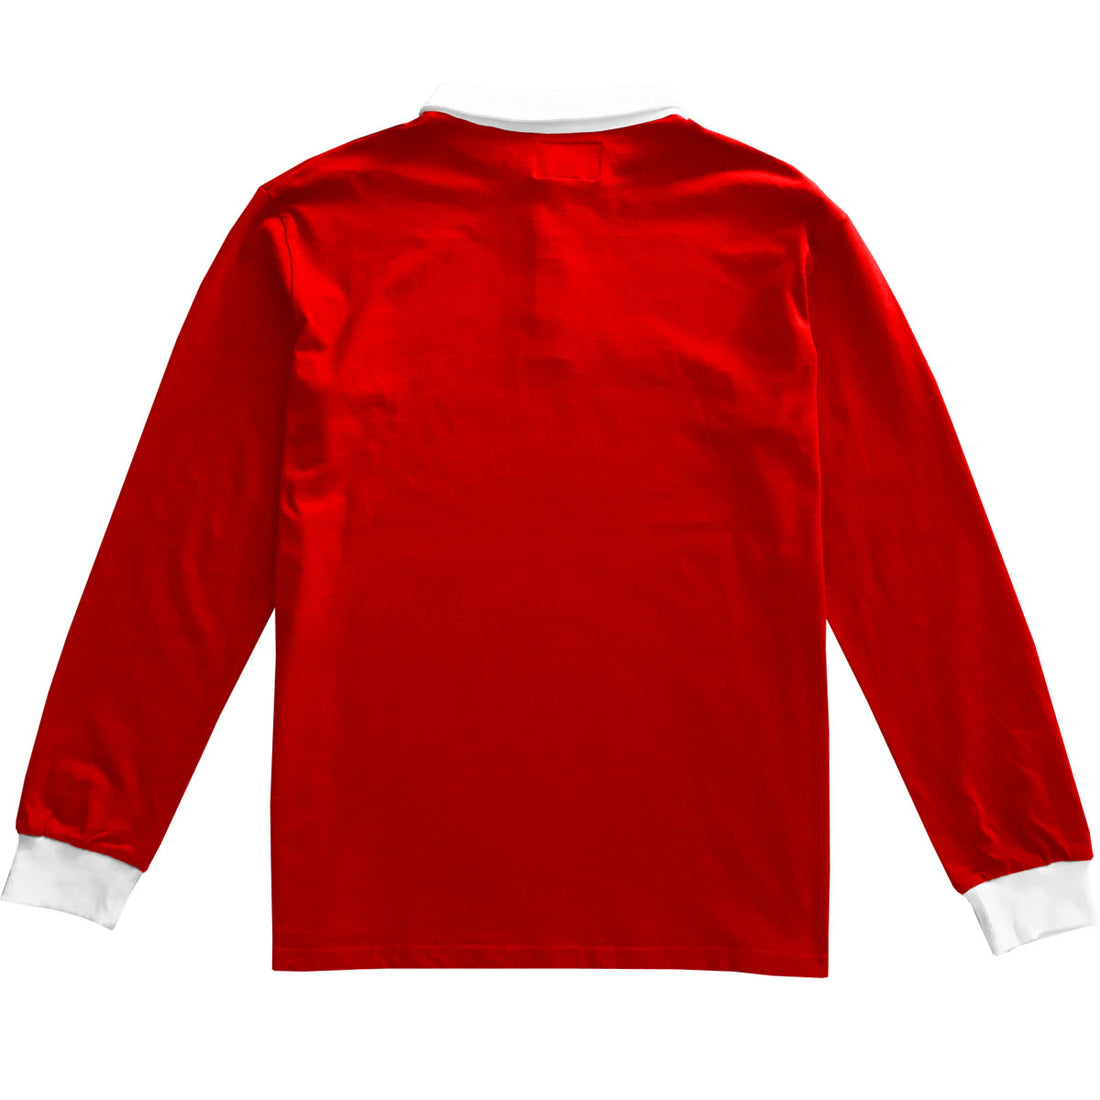 Solid Red with White Collar Mens Long Sleeve Polo Rugby Shirt